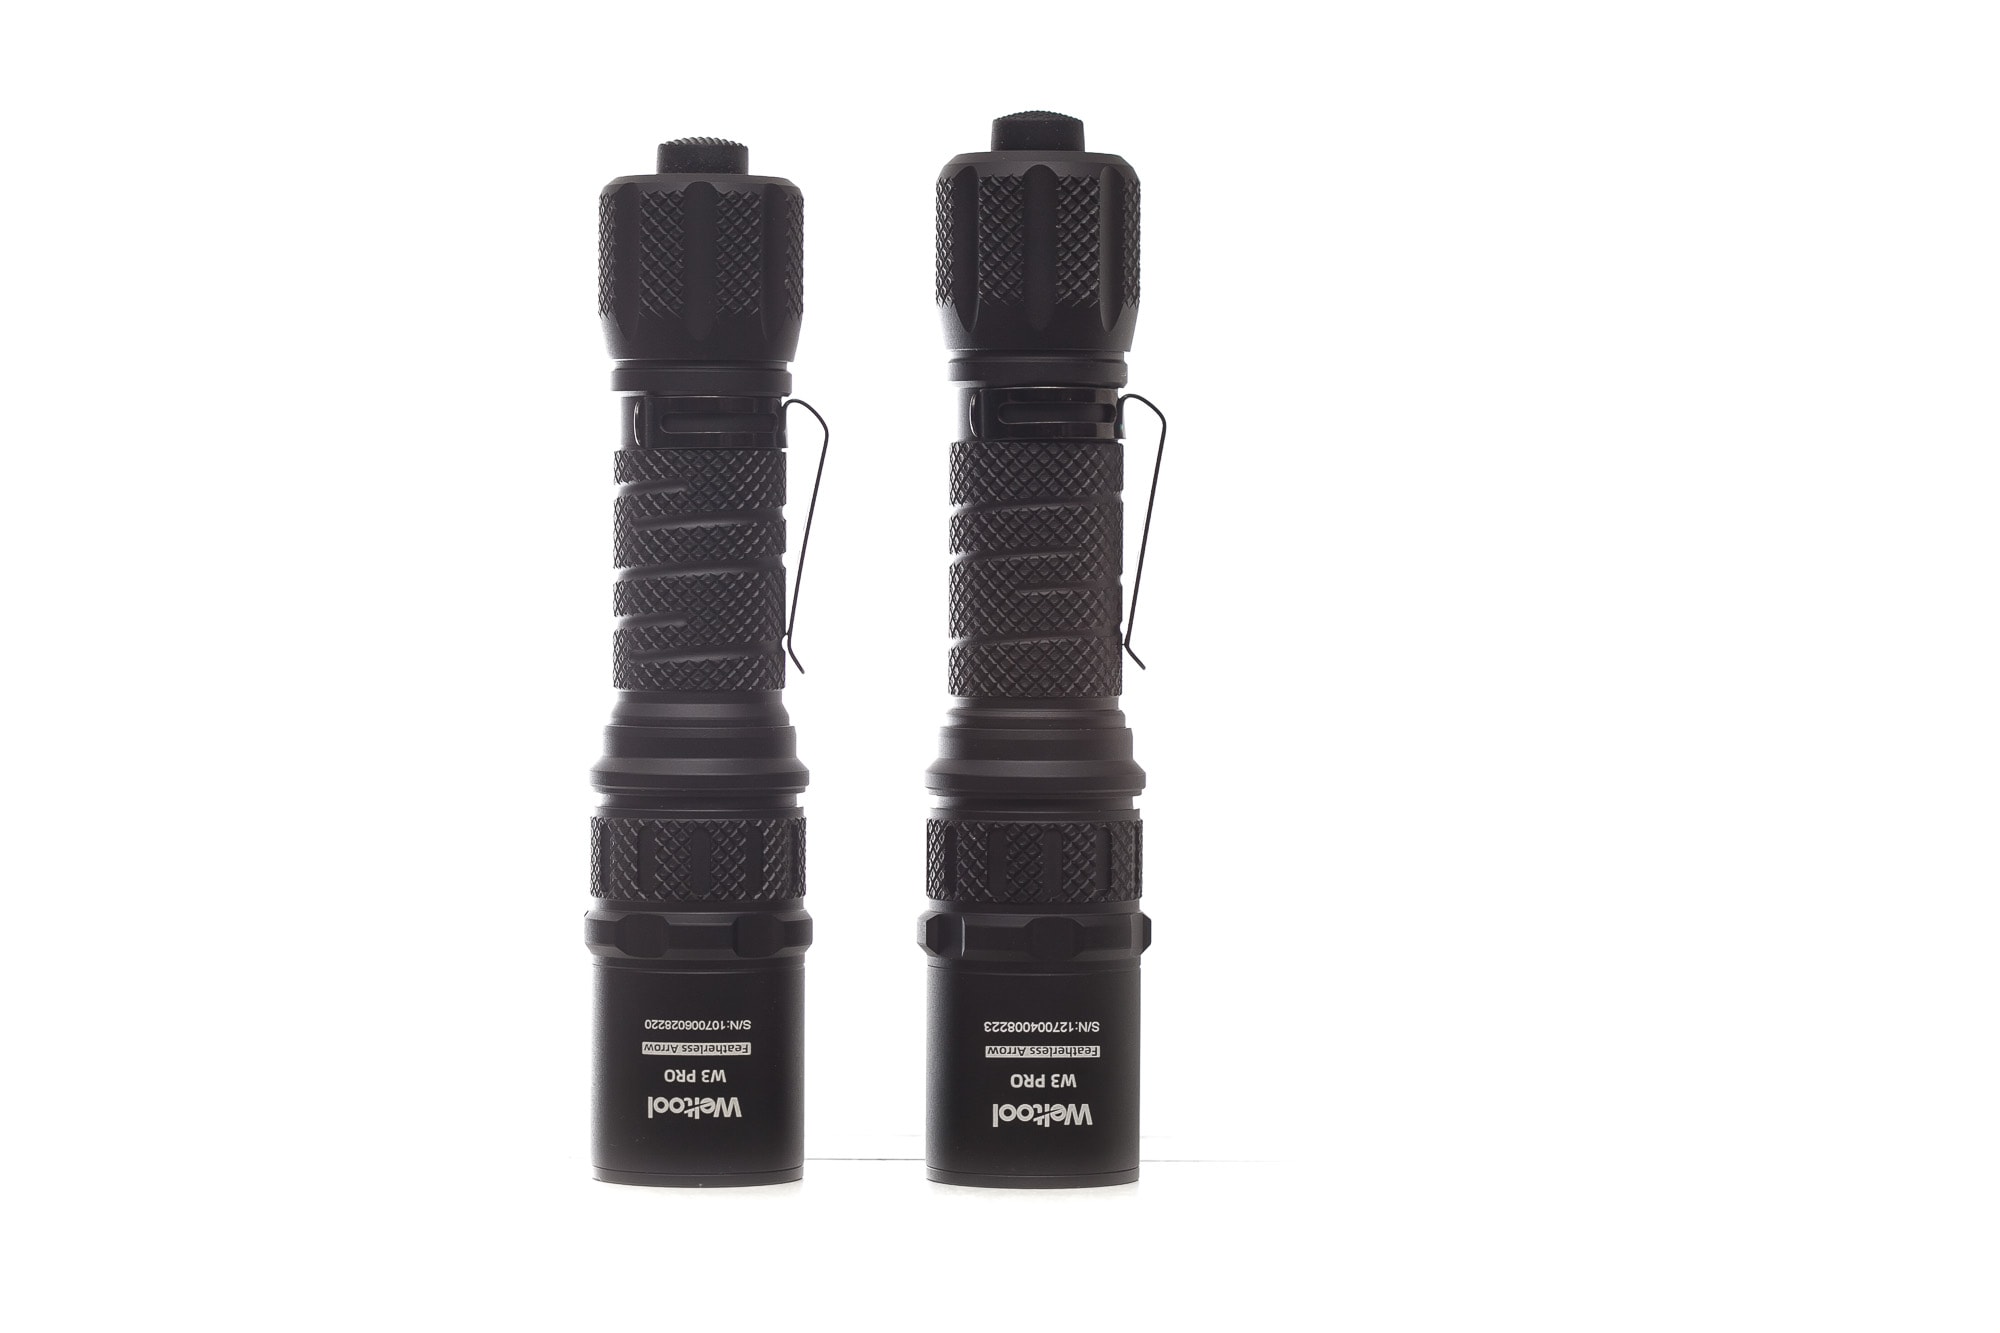 Weltool W3 PRO TAC review | LEP flashlight with 930 lumens